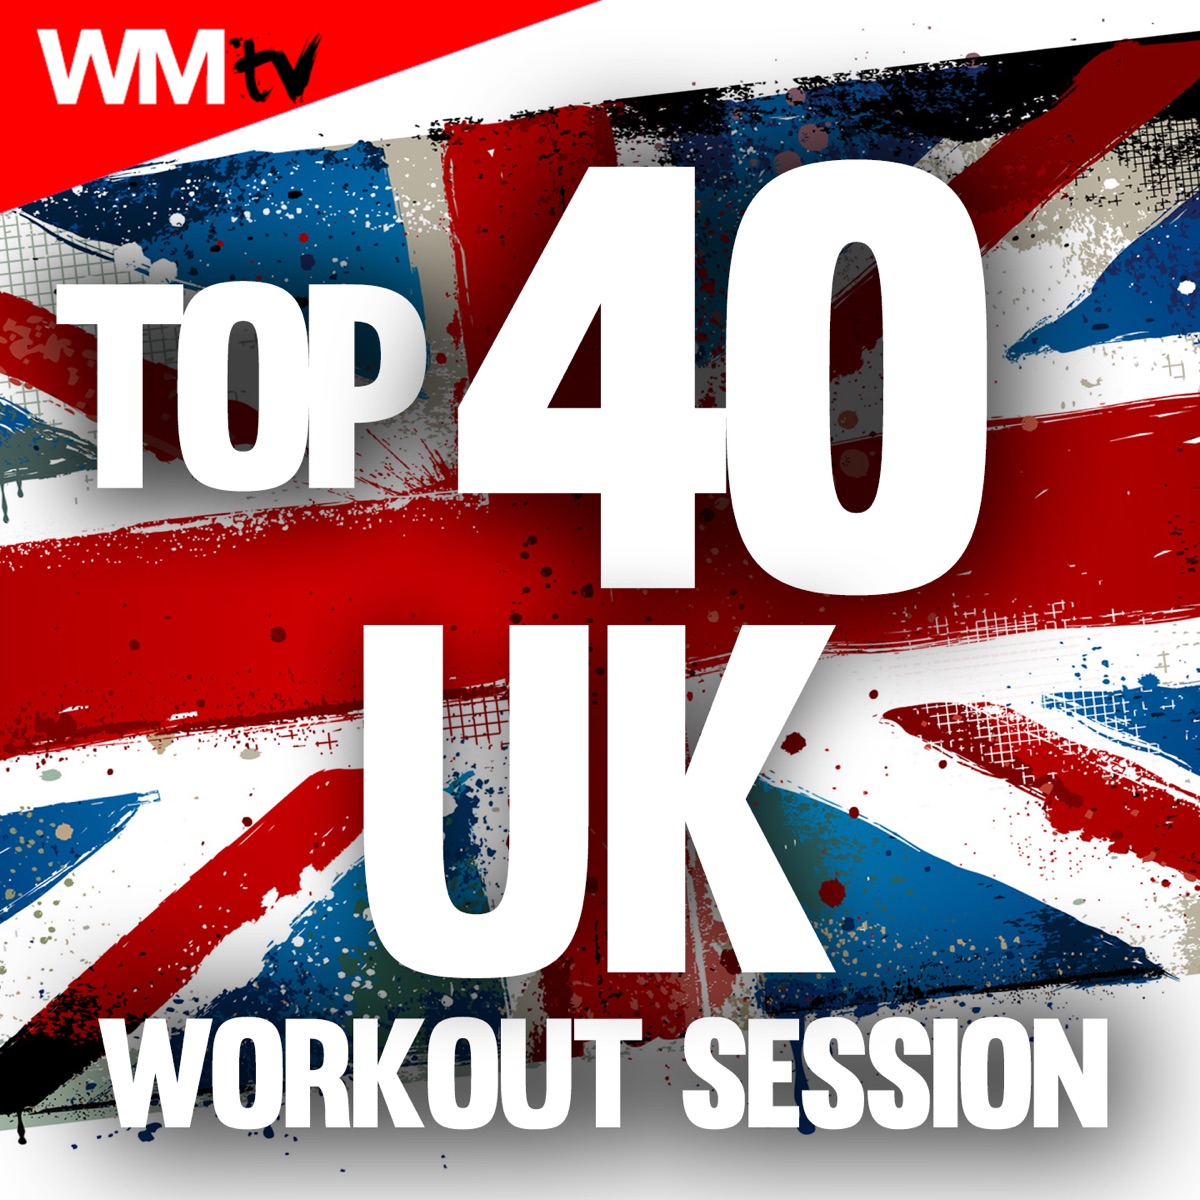 Top 40 UK Workout Session (60 Minutes Non-Stop Mixed Compilation for  Fitness & Workout 135 BPM) by Workout Music TV on Apple Music